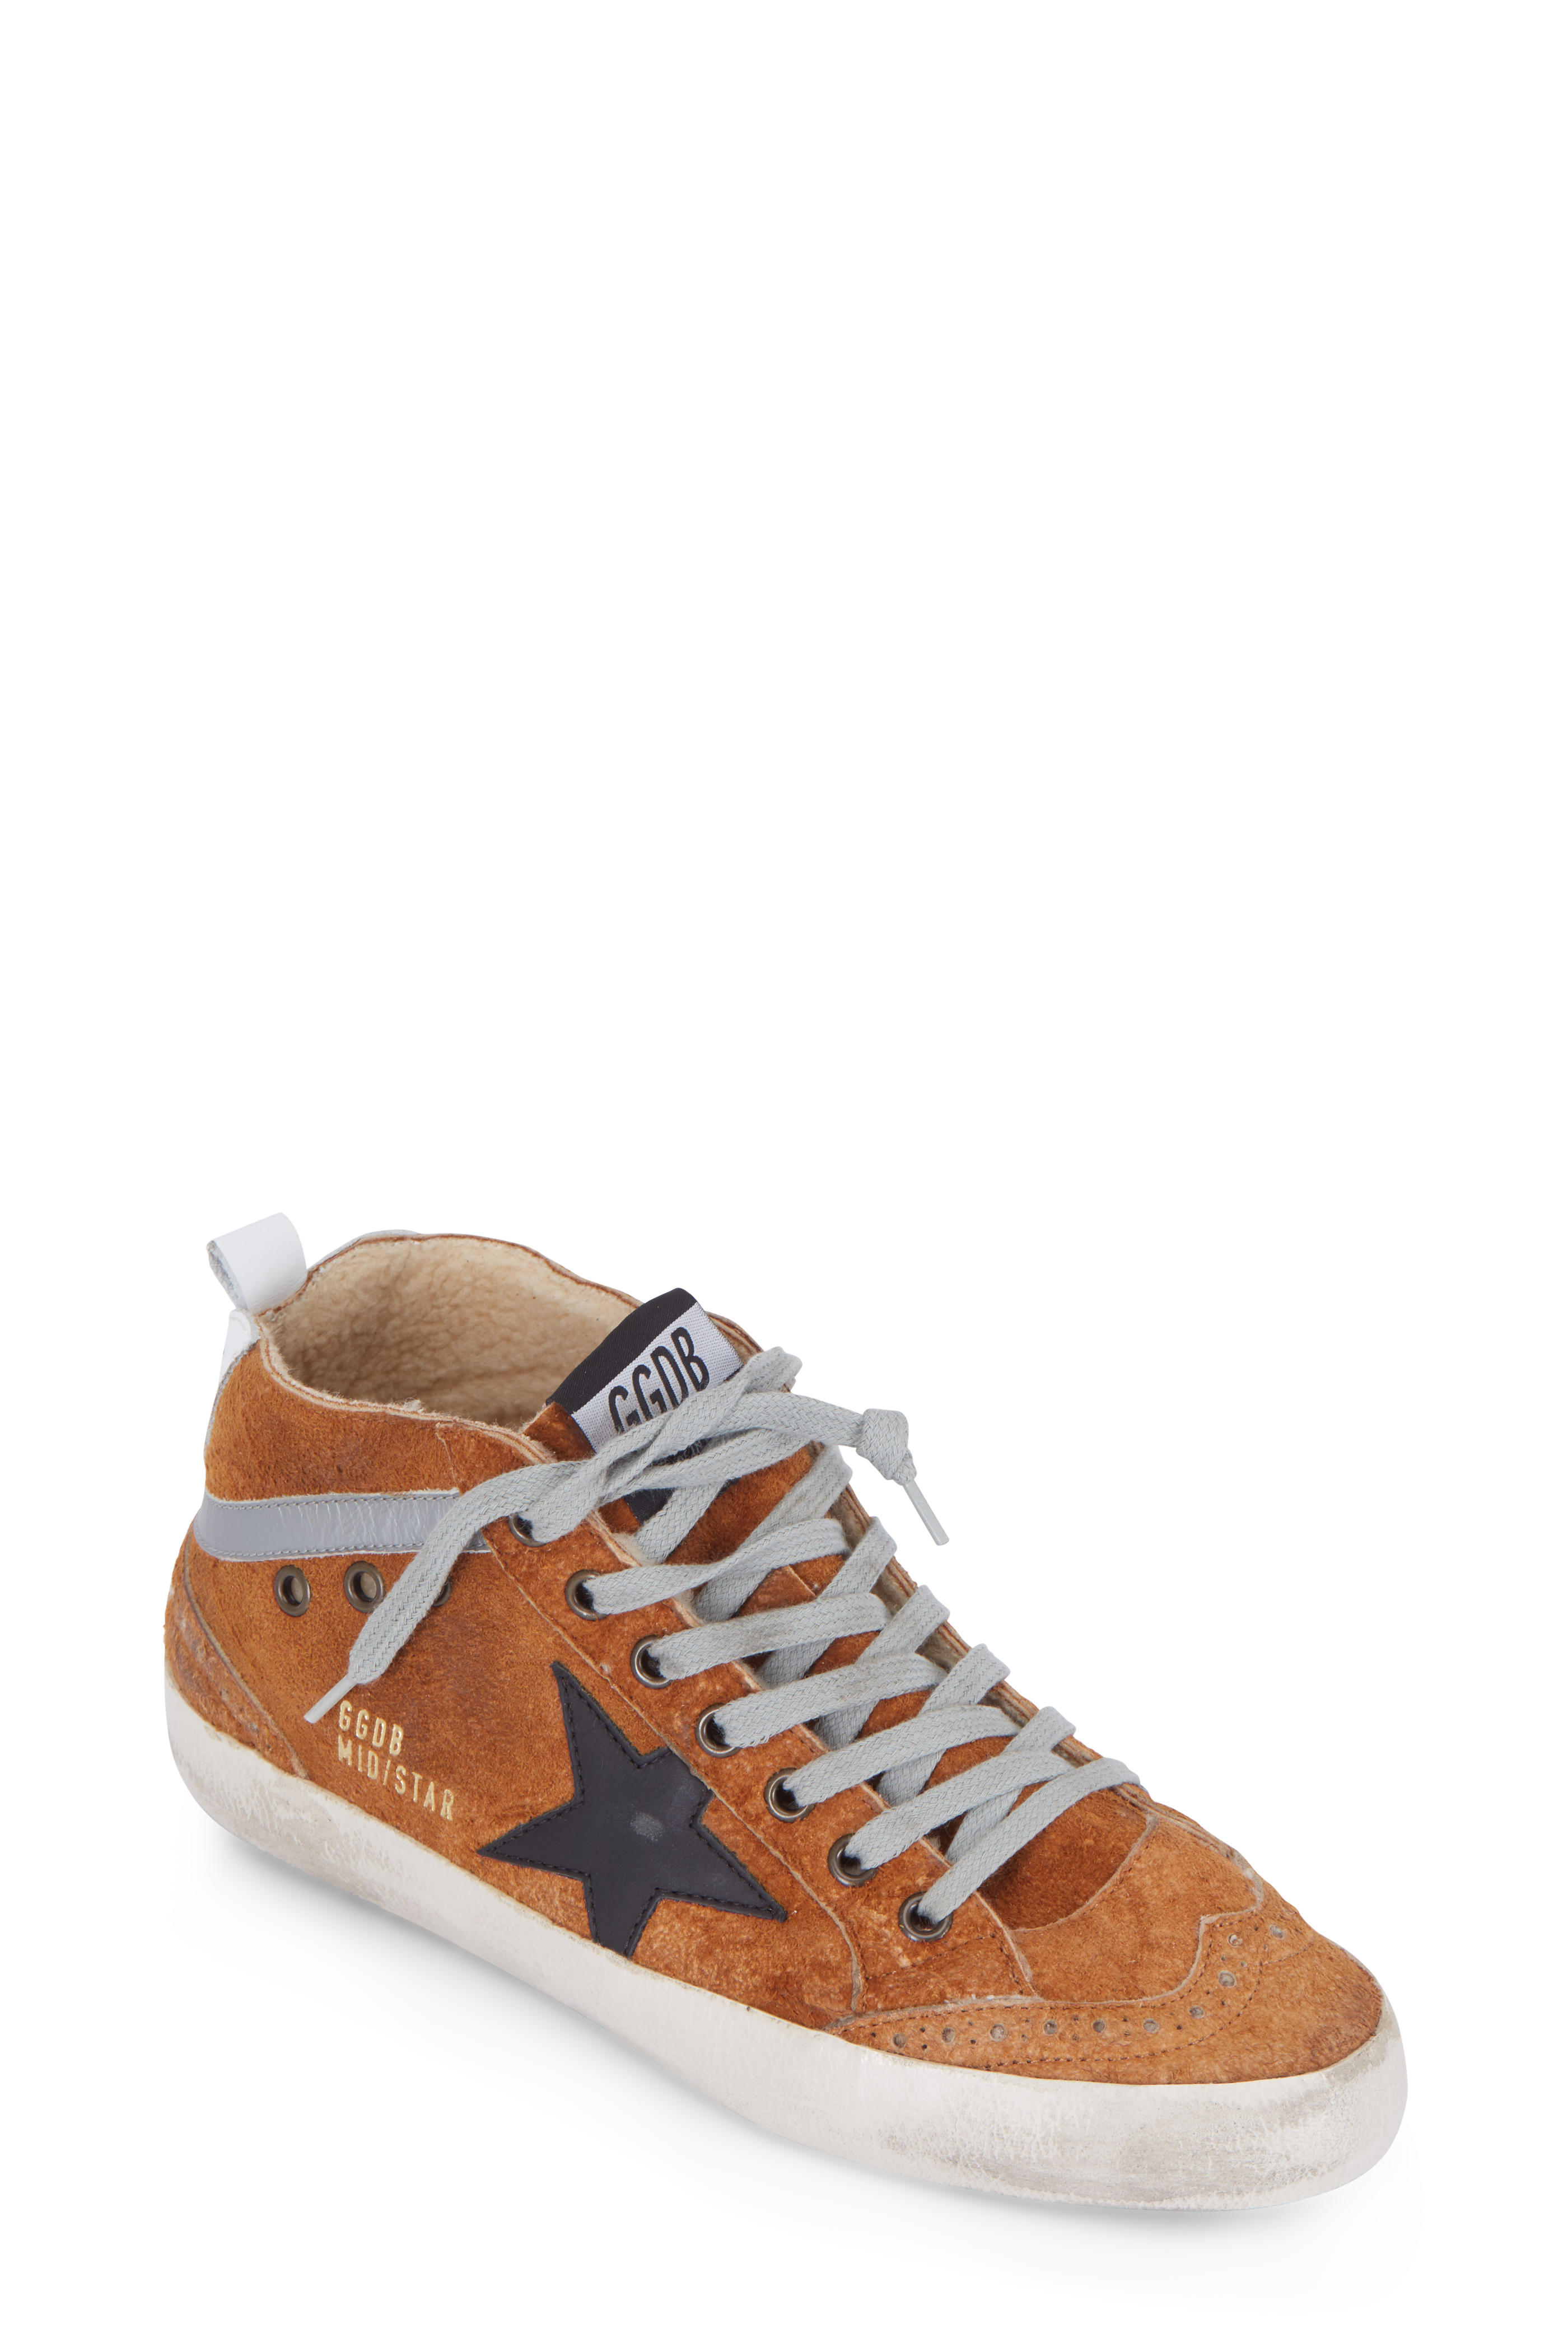 golden goose shearling lined sneakers